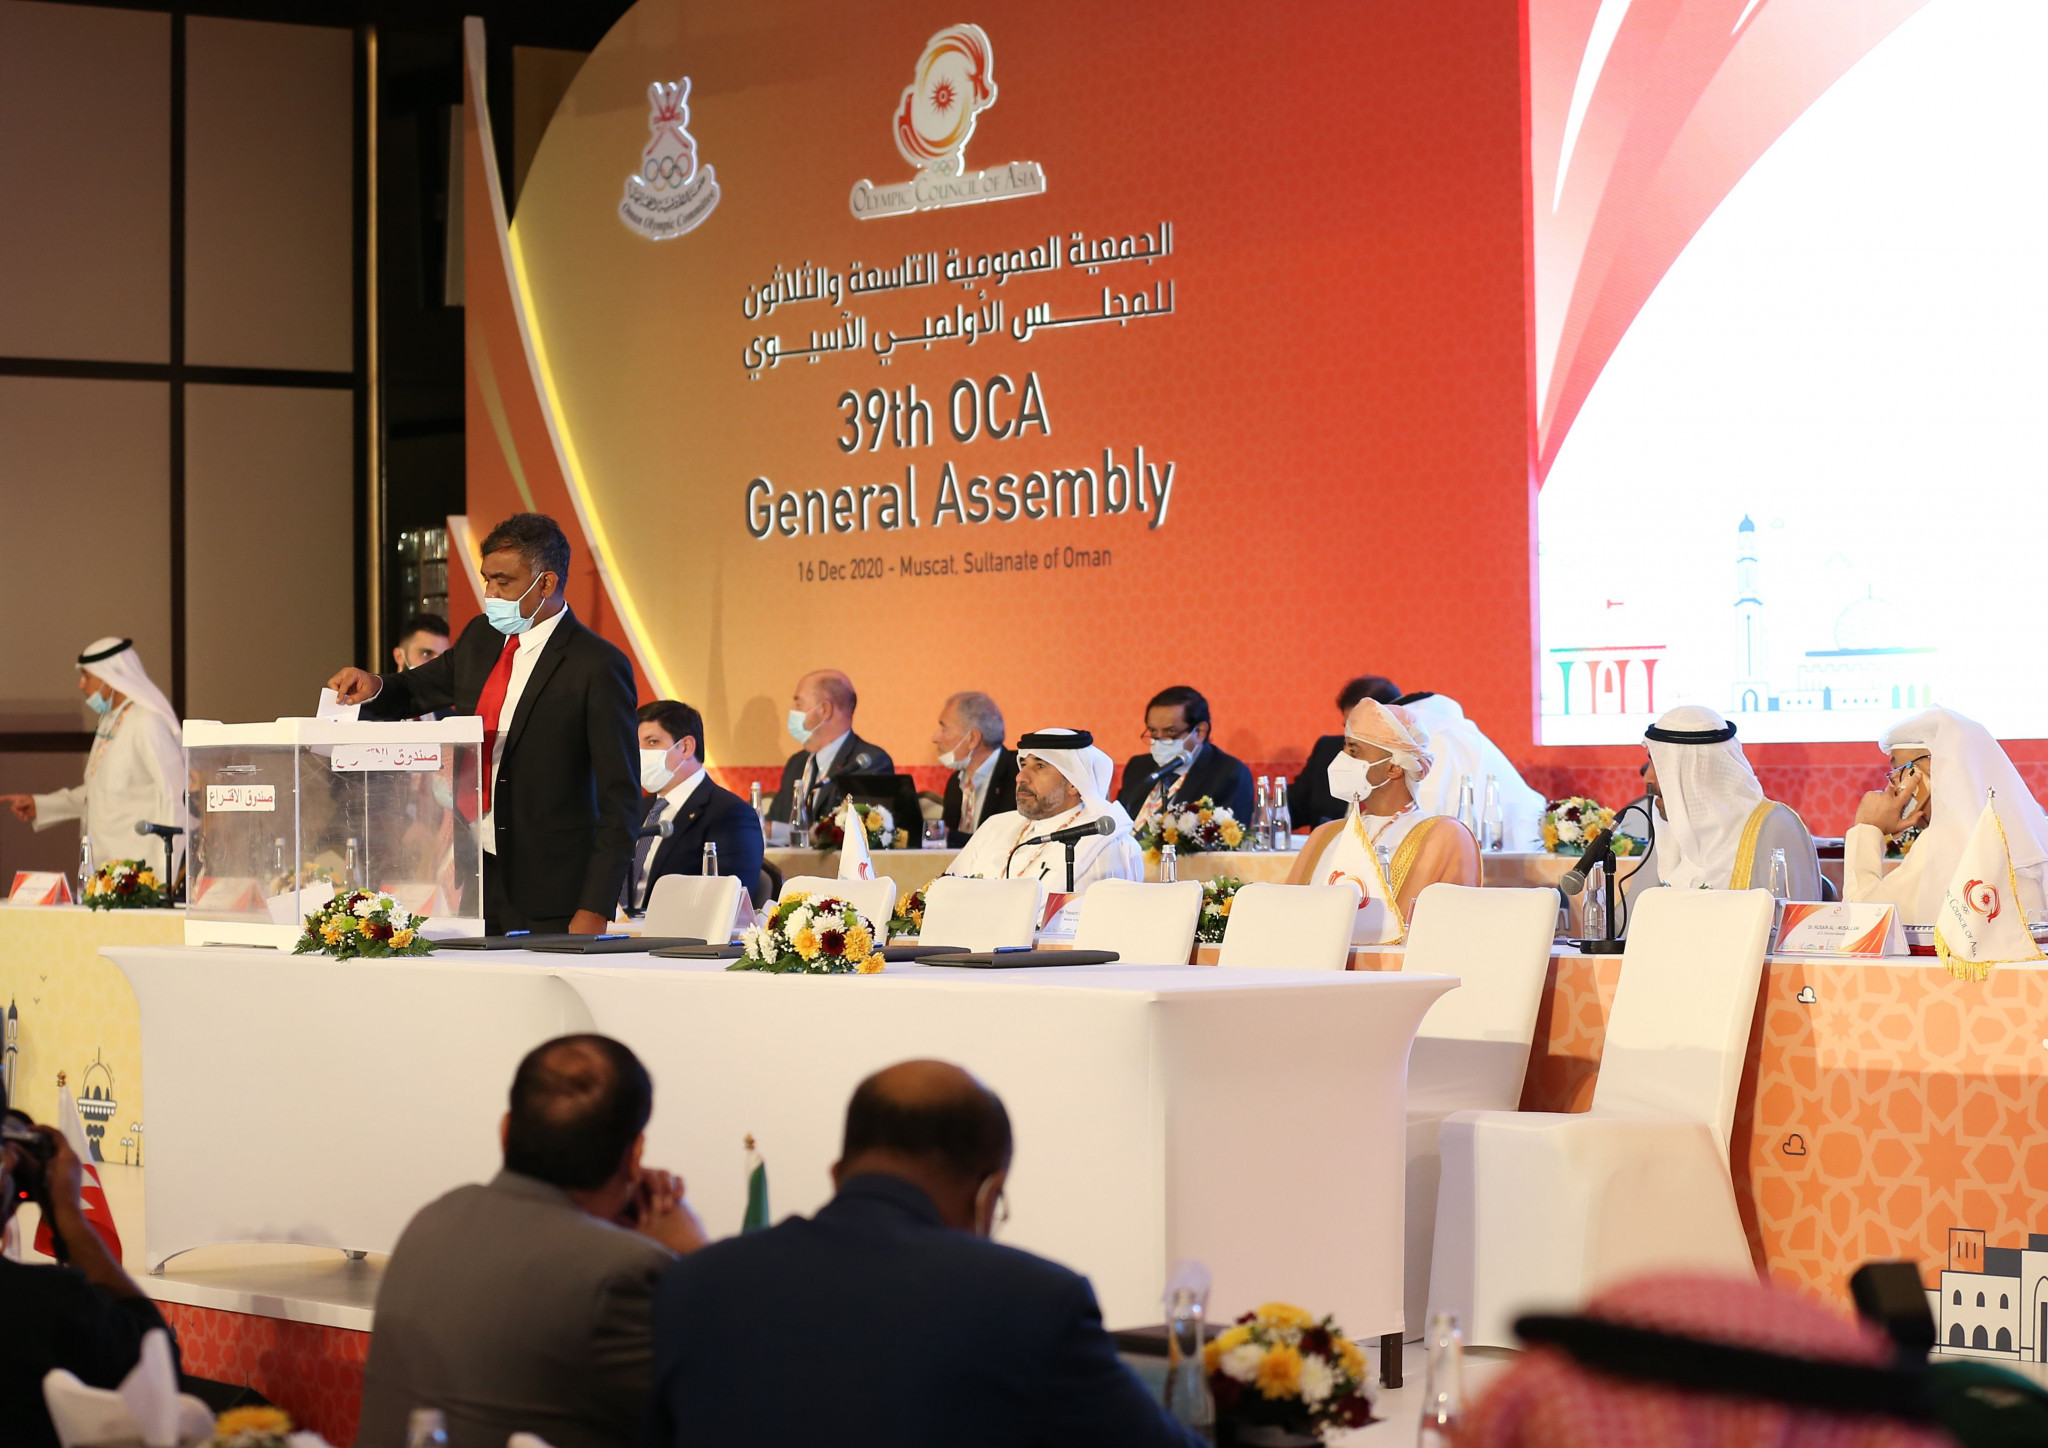 The General Assembly is the final authority which determines all matters concerning the OCA ©OCA